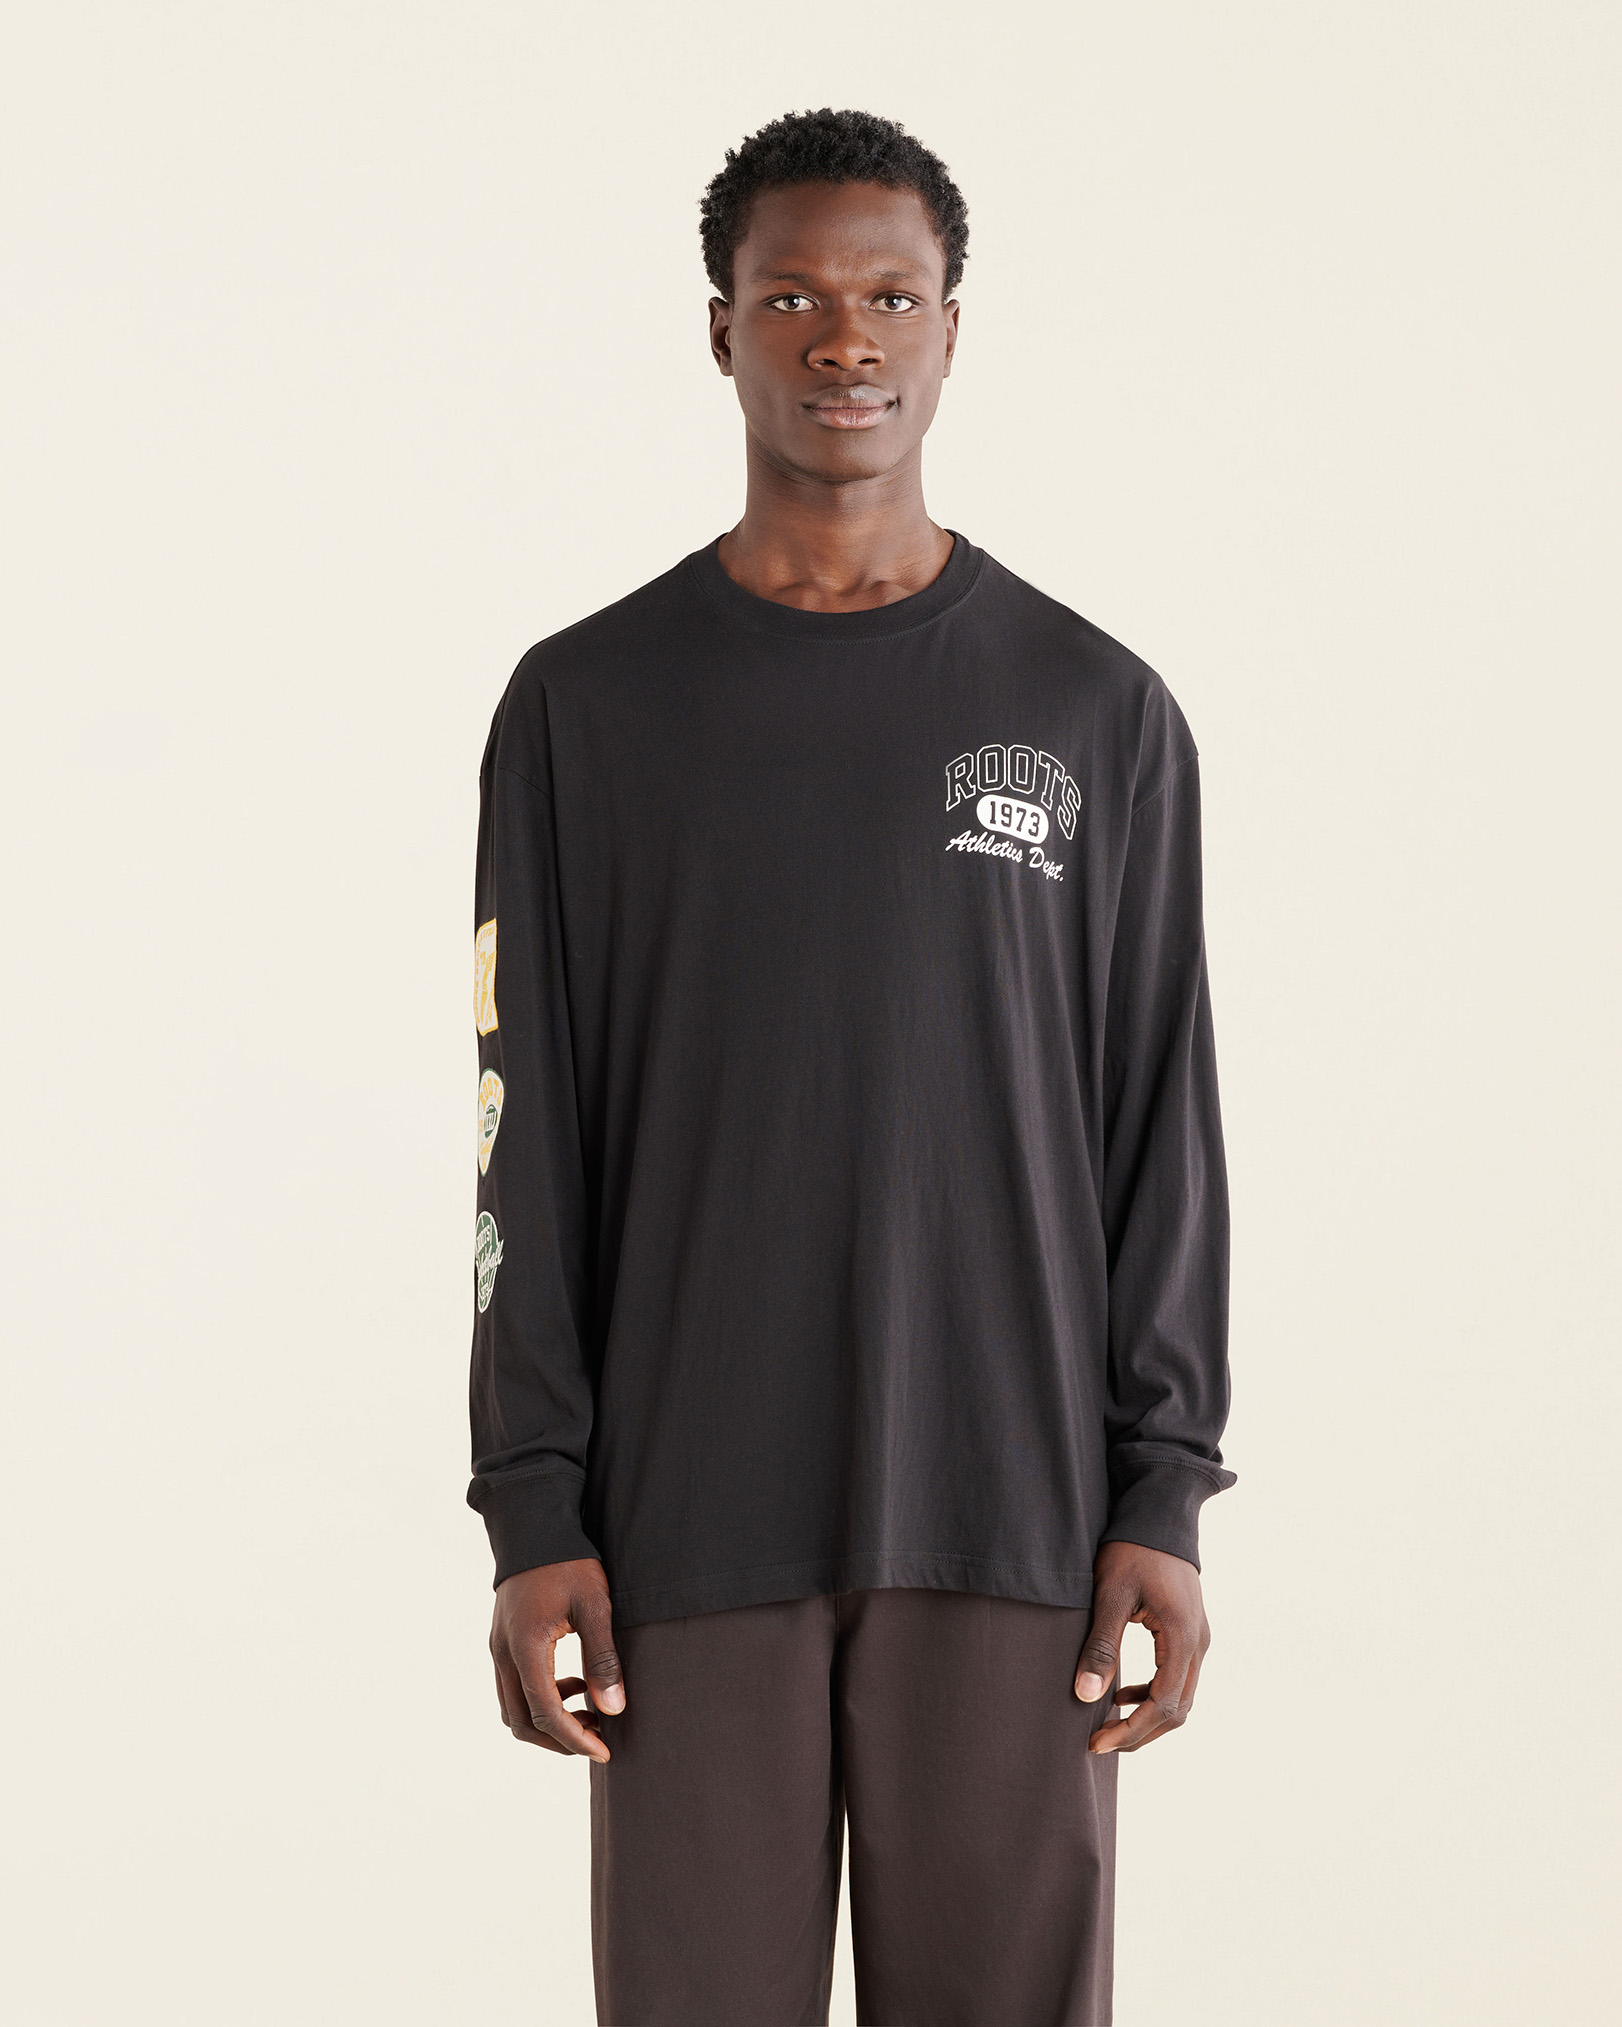 Roots Men's Athletics Dept Relaxed Long Sleeve T-Shirt in Black